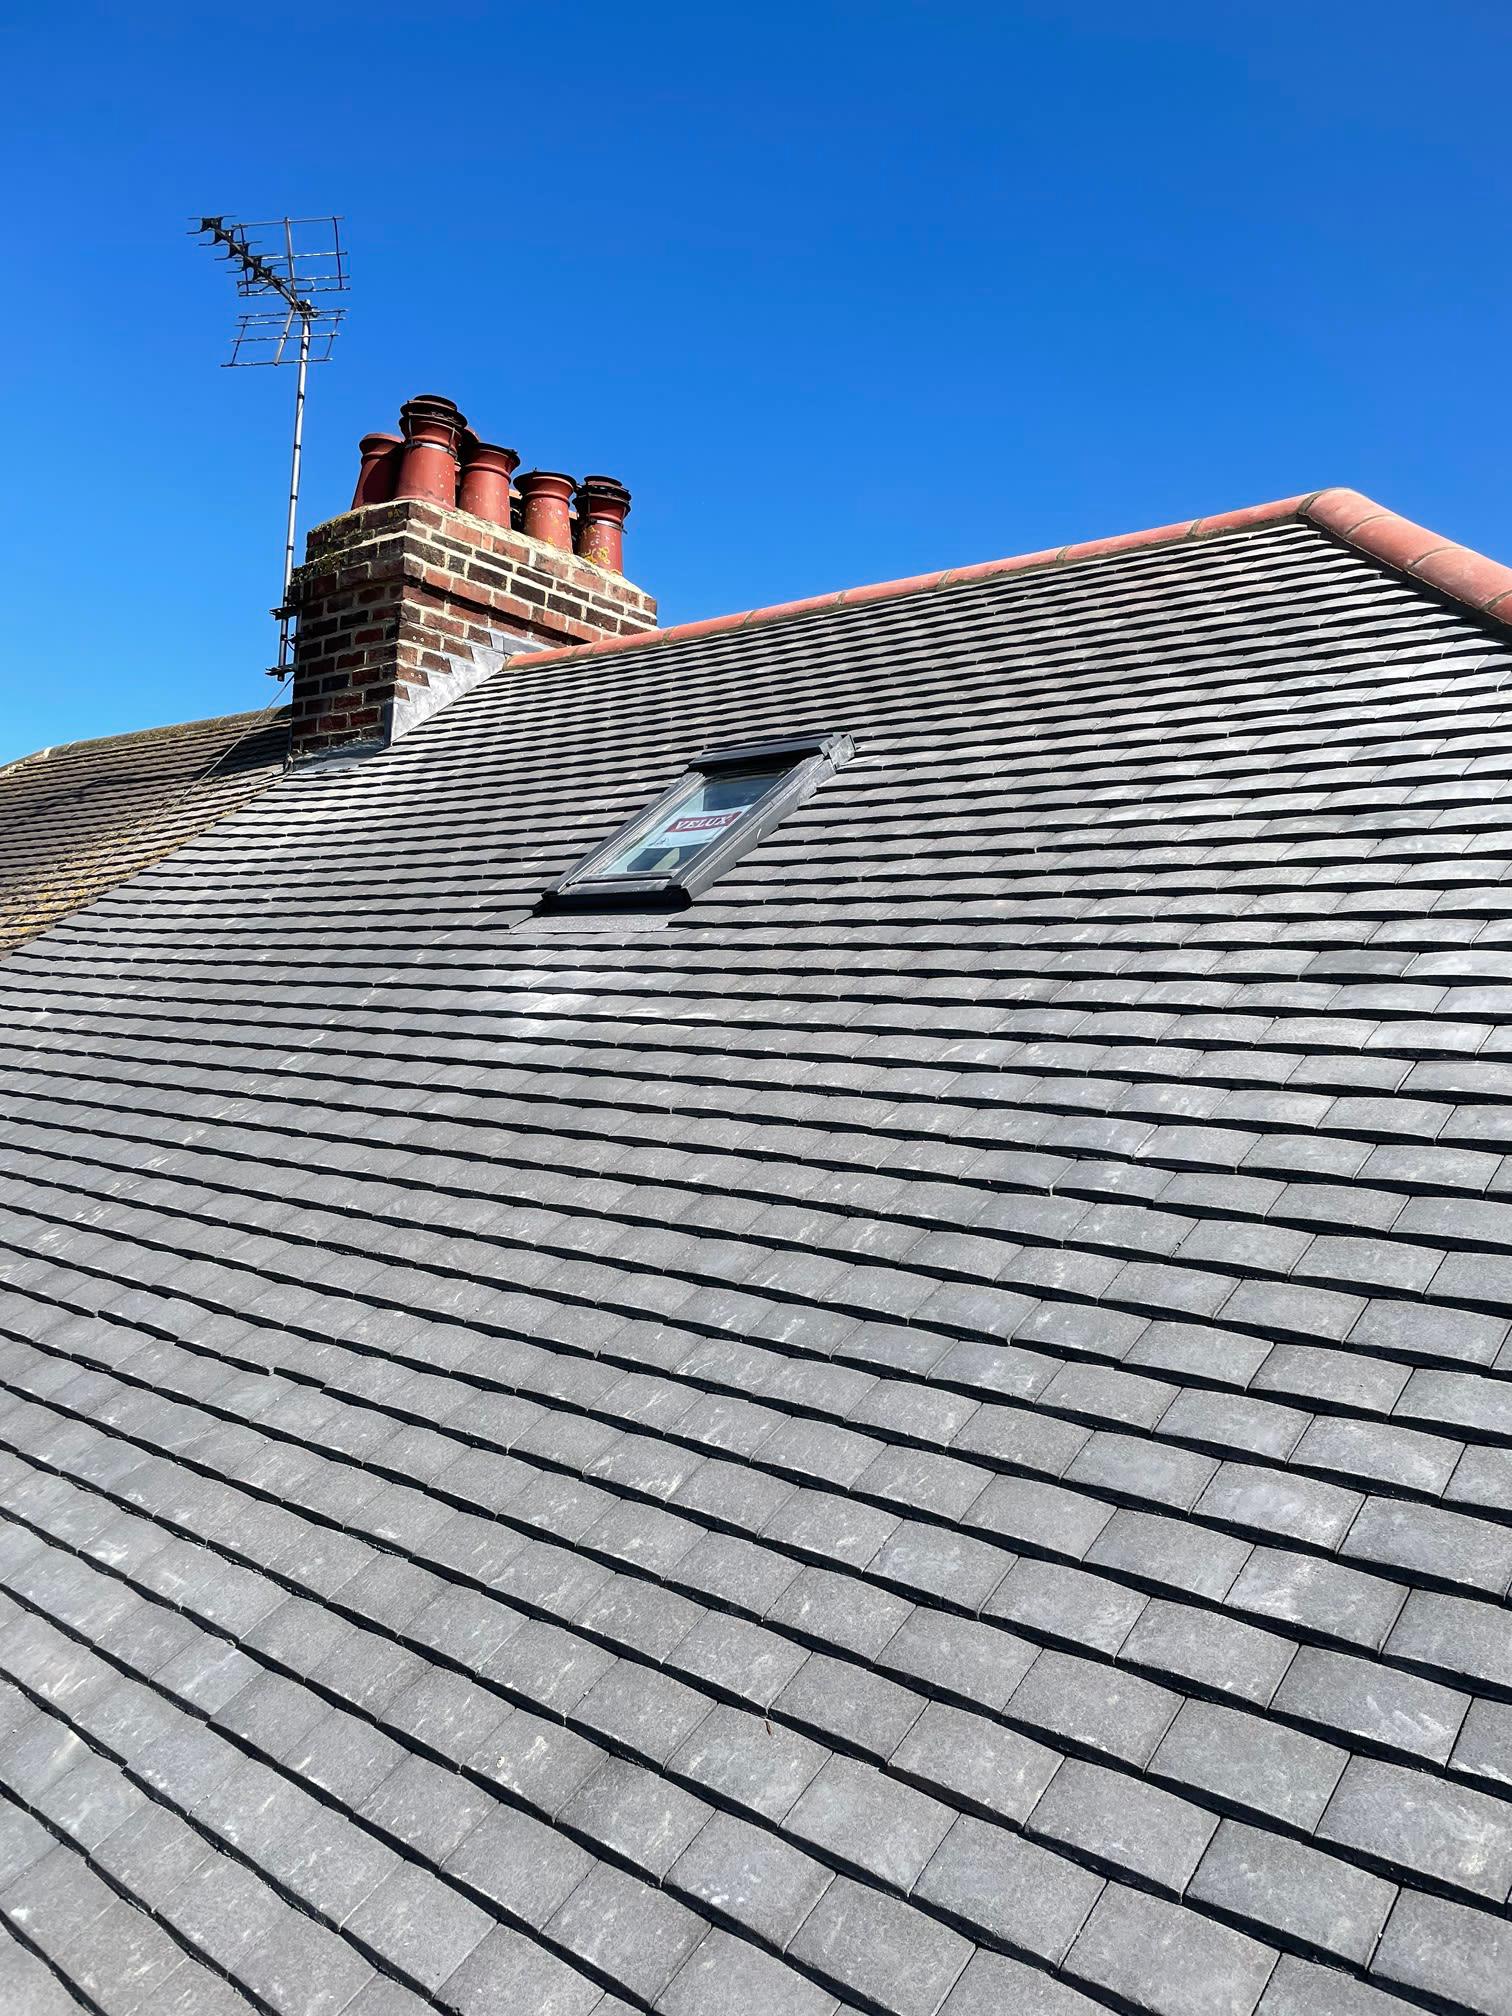 Images Lewis Roofing Solutions Ltd